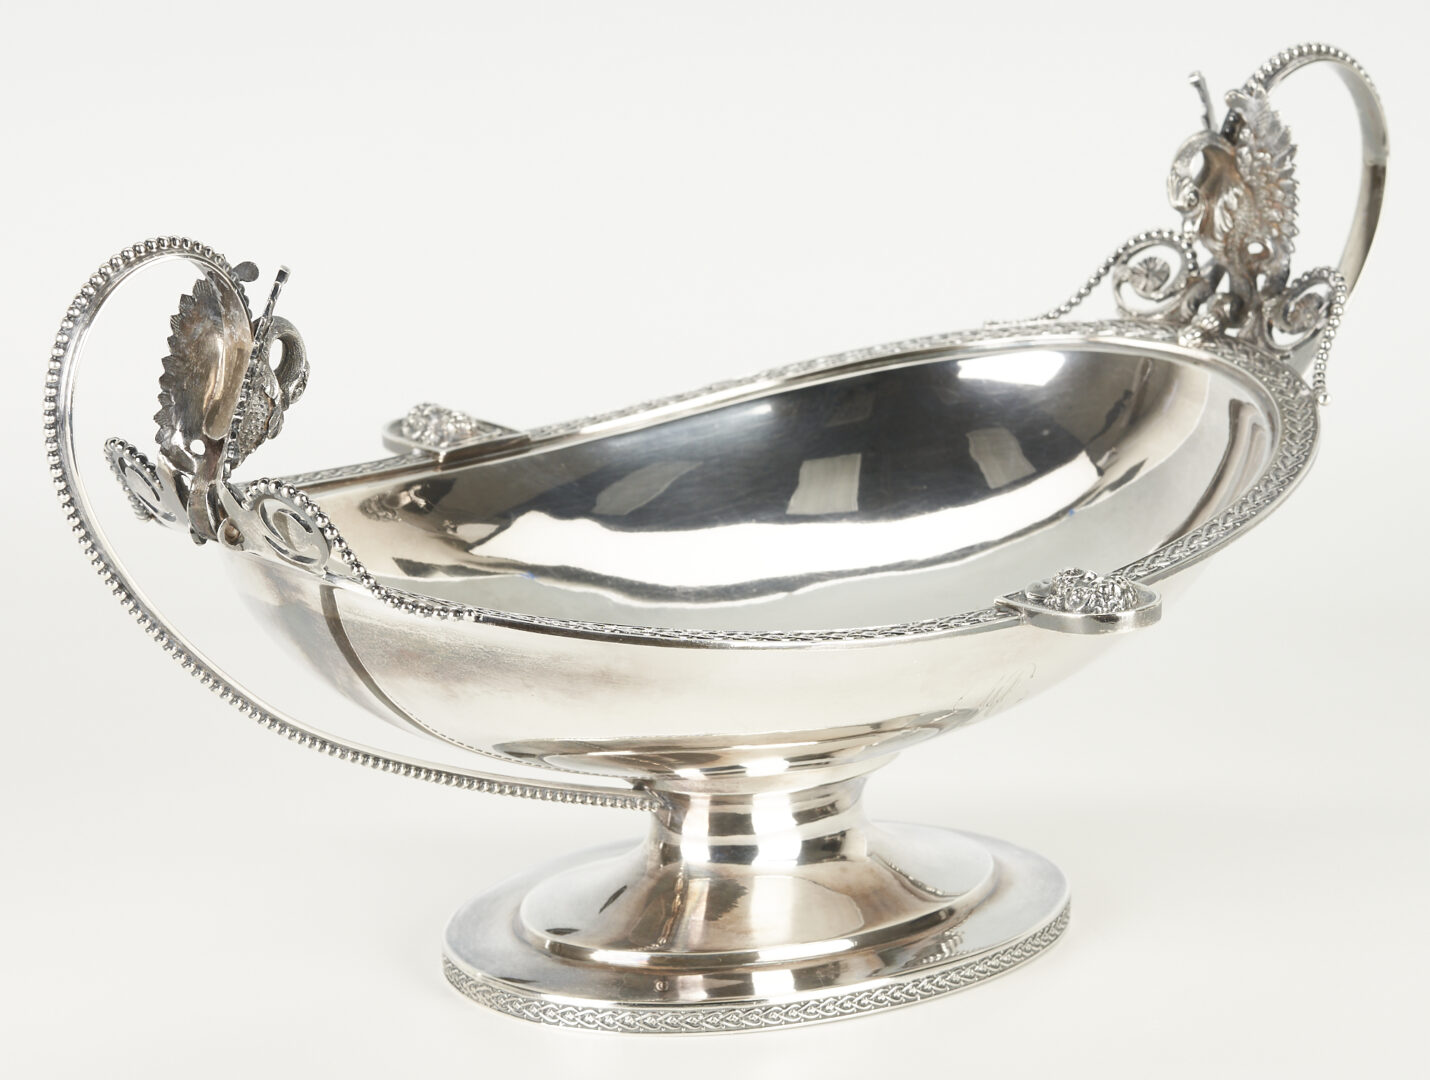 Lot 235: Wood & Hughes Coin Silver Medallion Fruit or Centerpiece Bowl, Figural Swan Handles